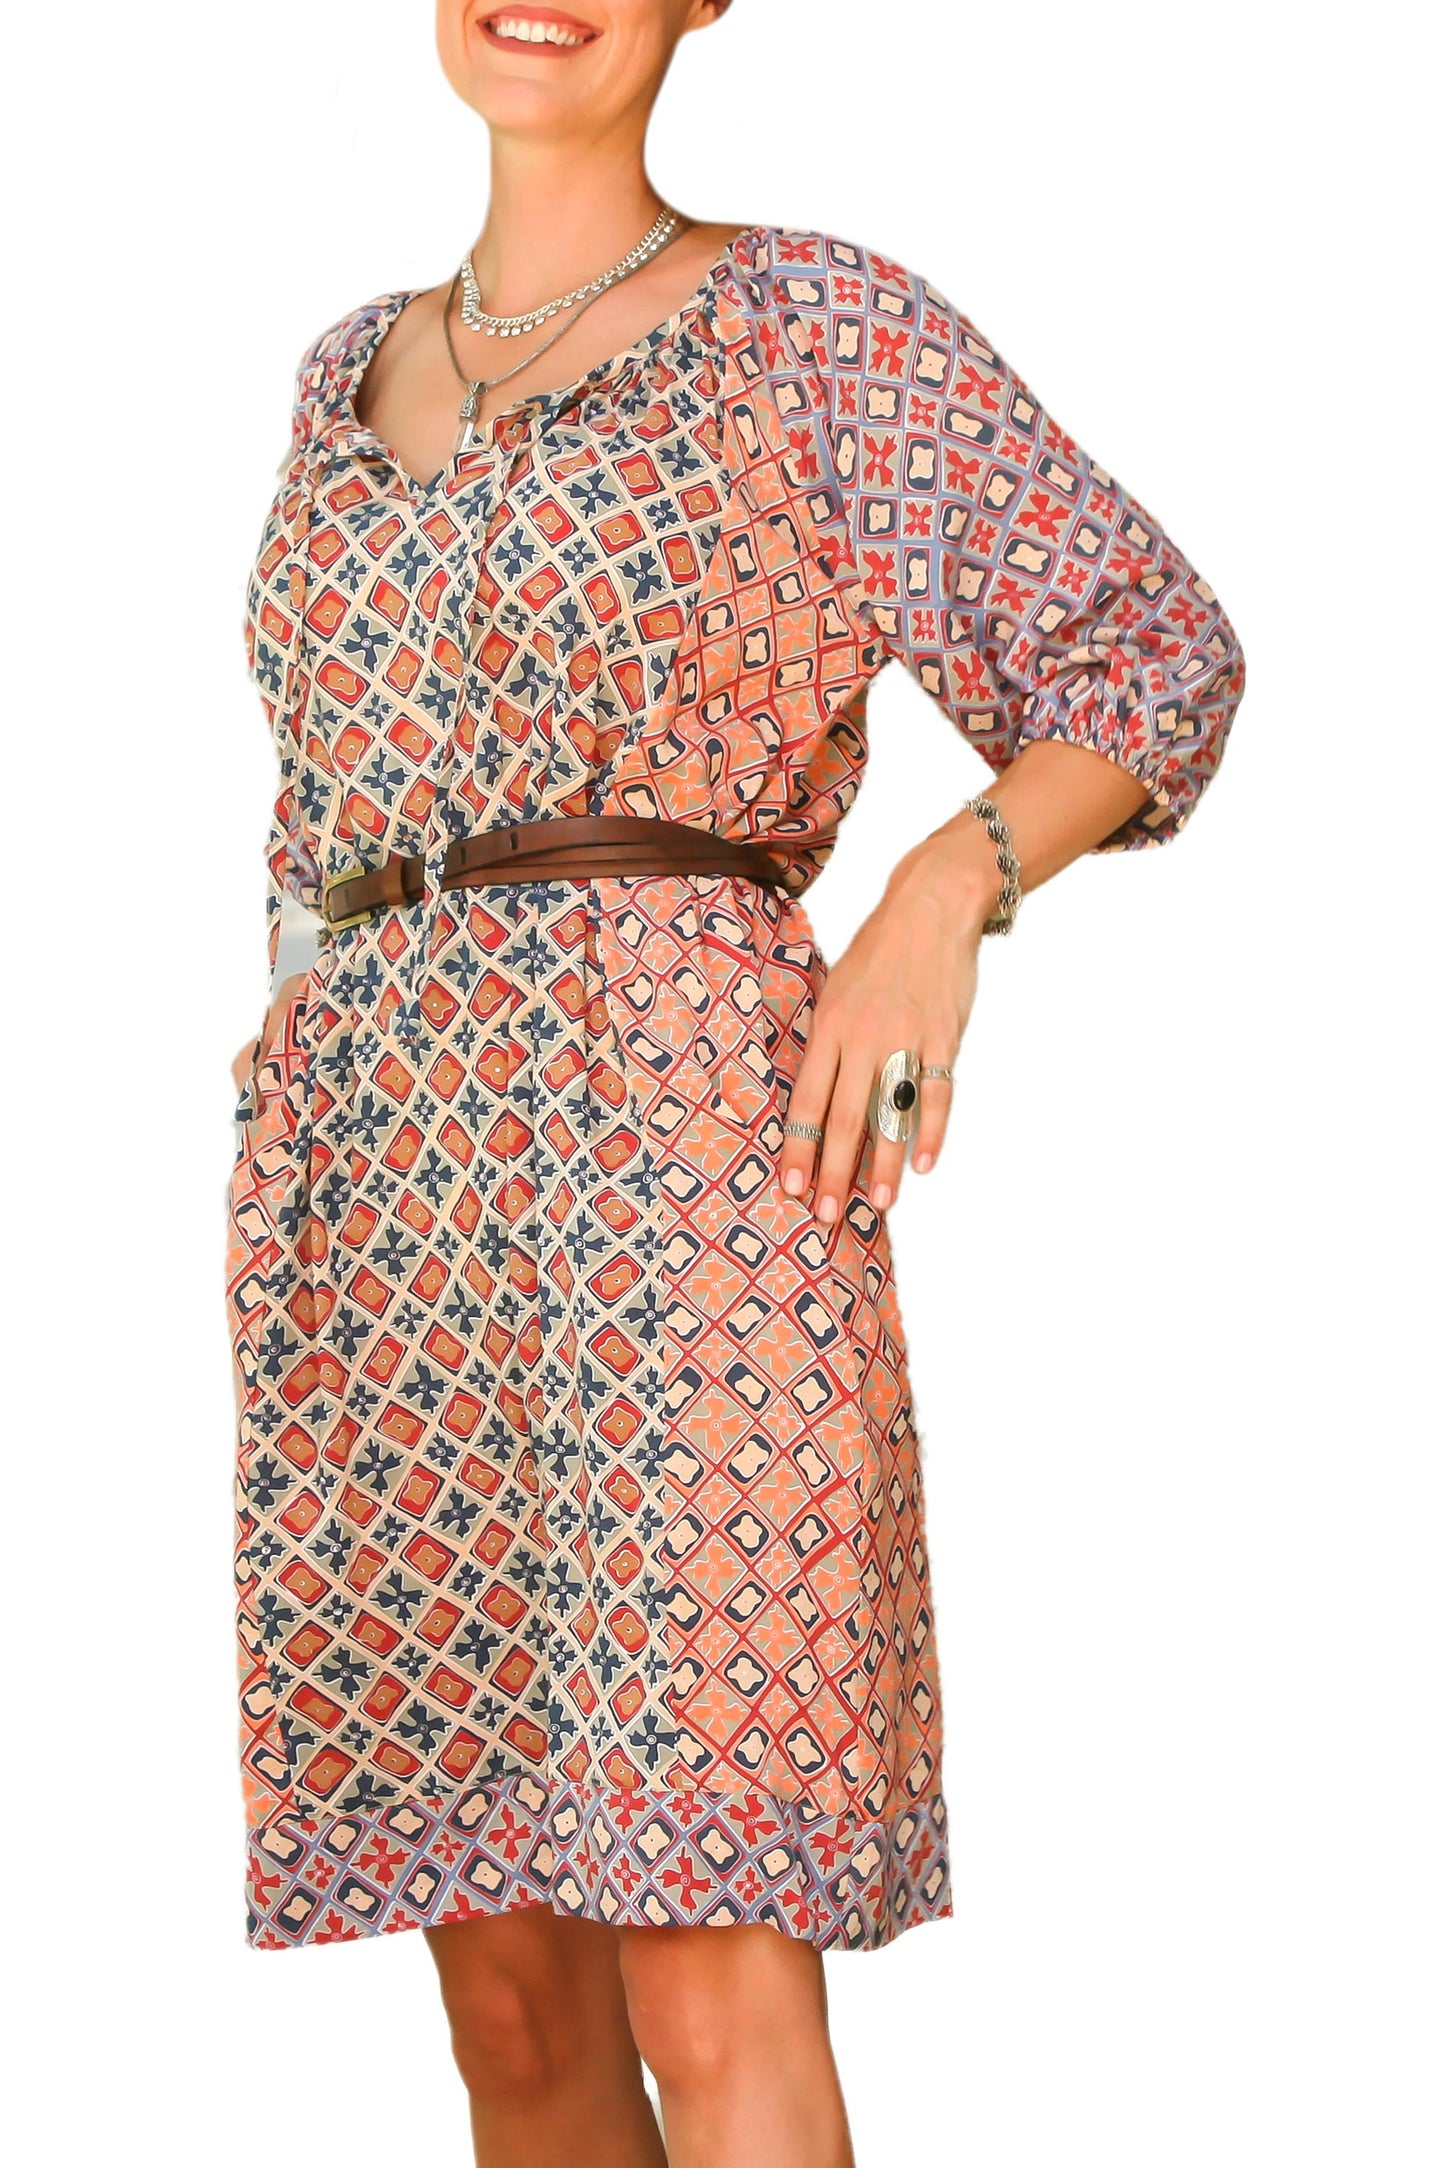 Kelud Crisscross Printed Rayon Tunic-Style Dress Crafted in Bali